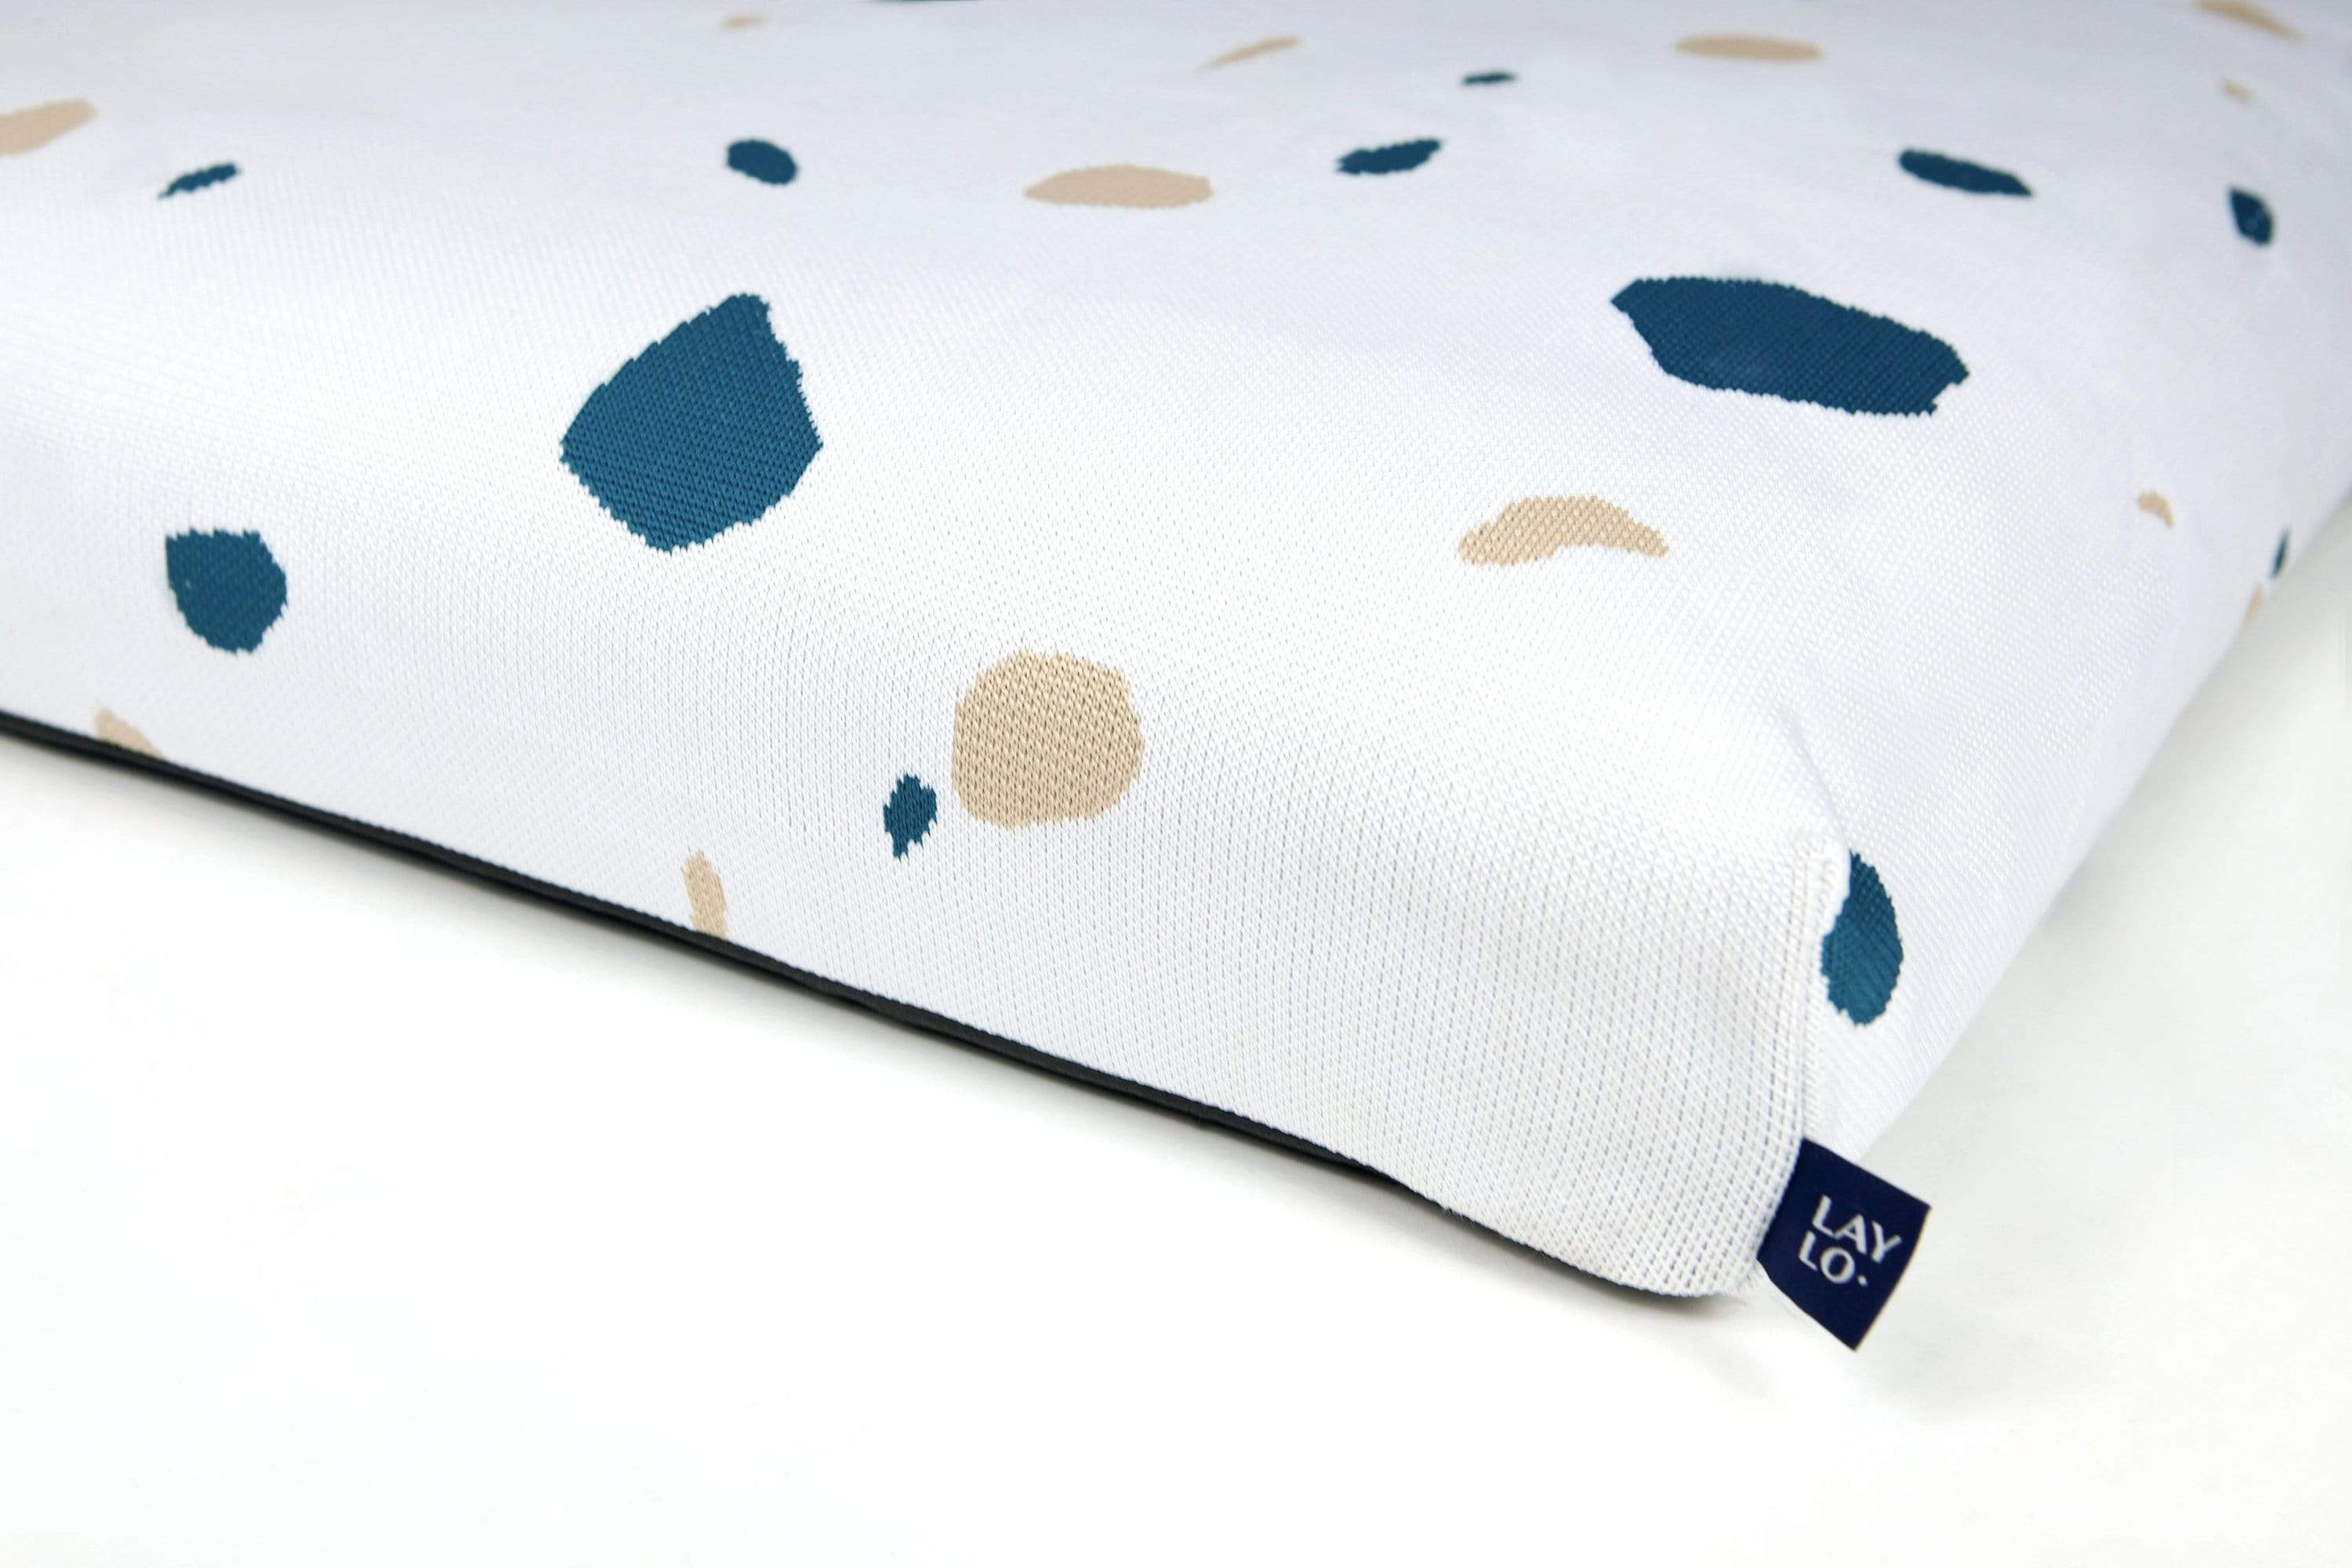 Laylo Pets Terrazzo LAY LO - White Terrazzo Mid-Century Modern Dog Bed or Bed Cover Lay Lo Pets